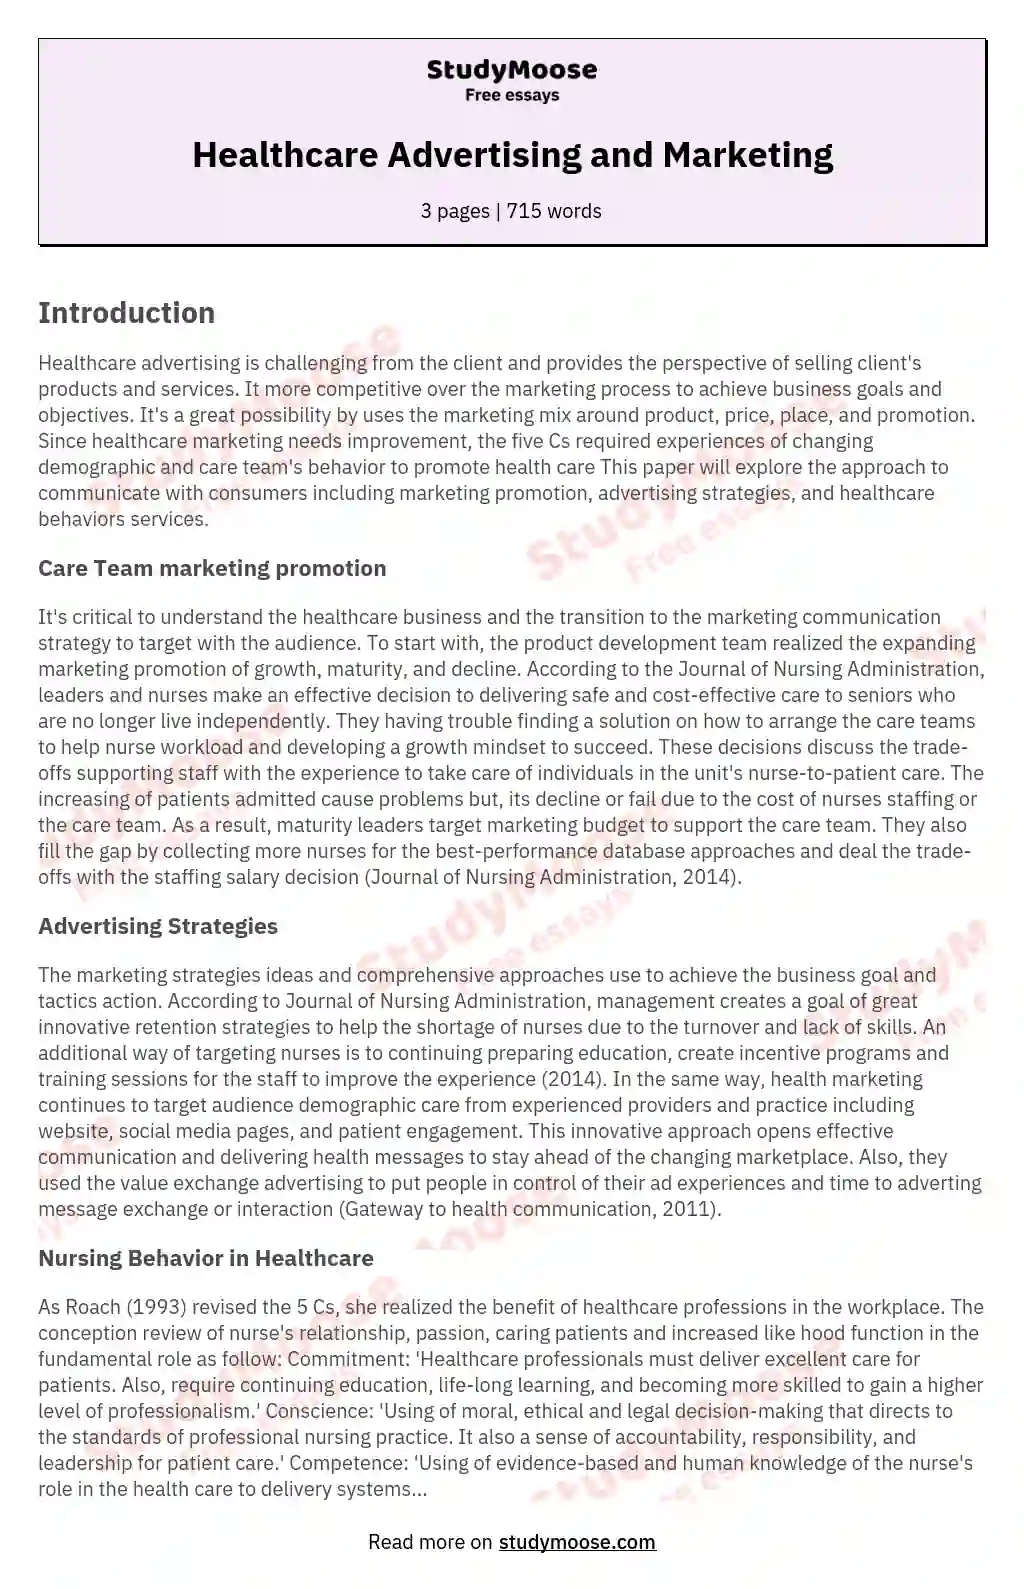 Healthcare Advertising and Marketing essay